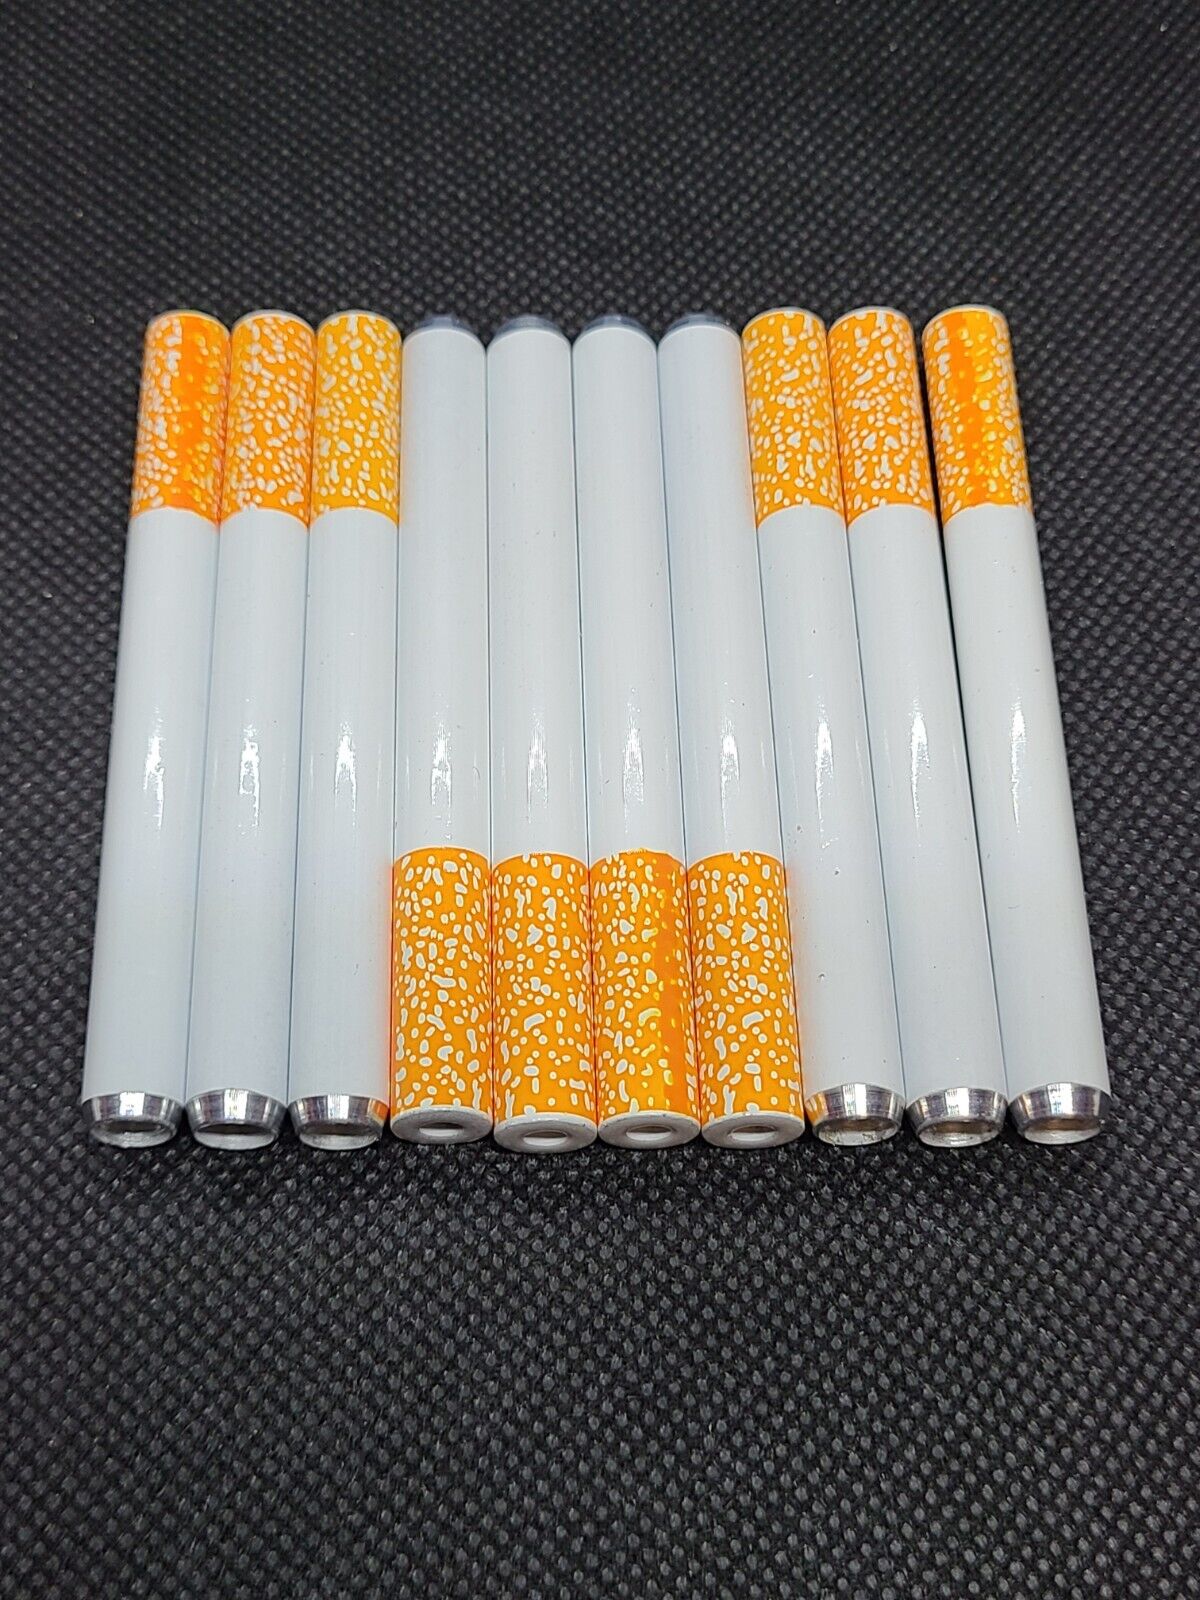 10x Metal One Hitter Pipe Cigarette Style Dugout Bat Large 3